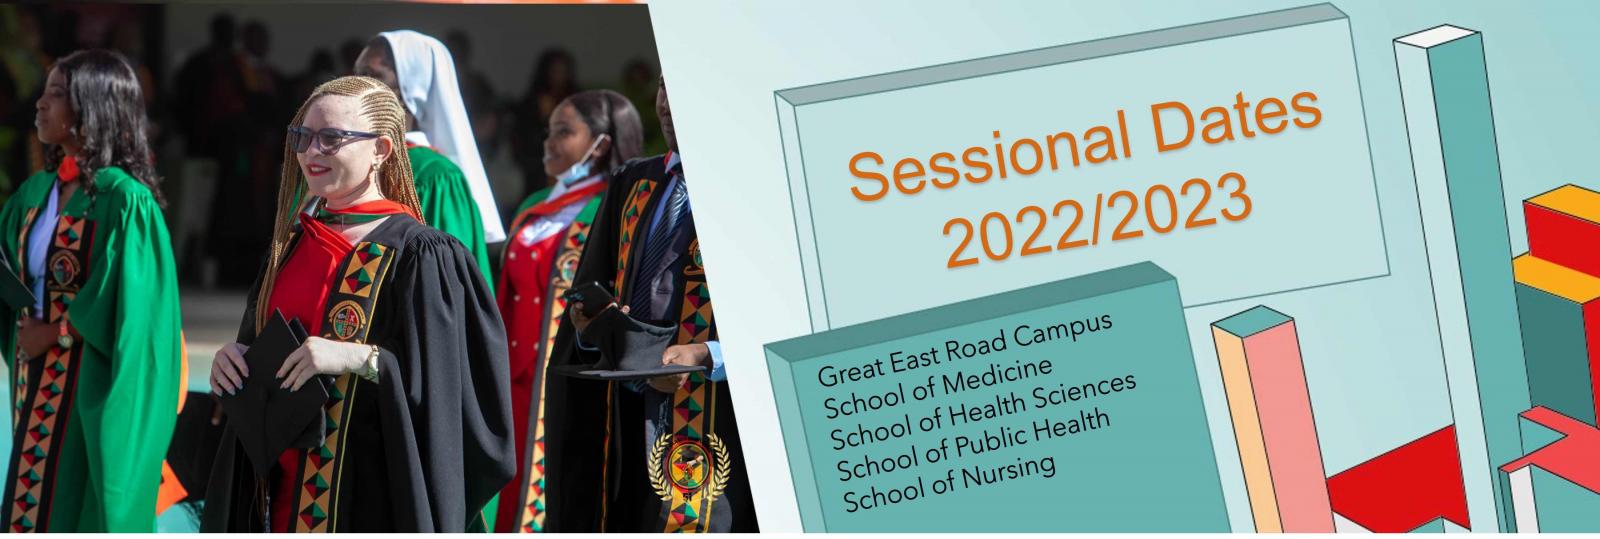 Sessional Dates 2022/2023